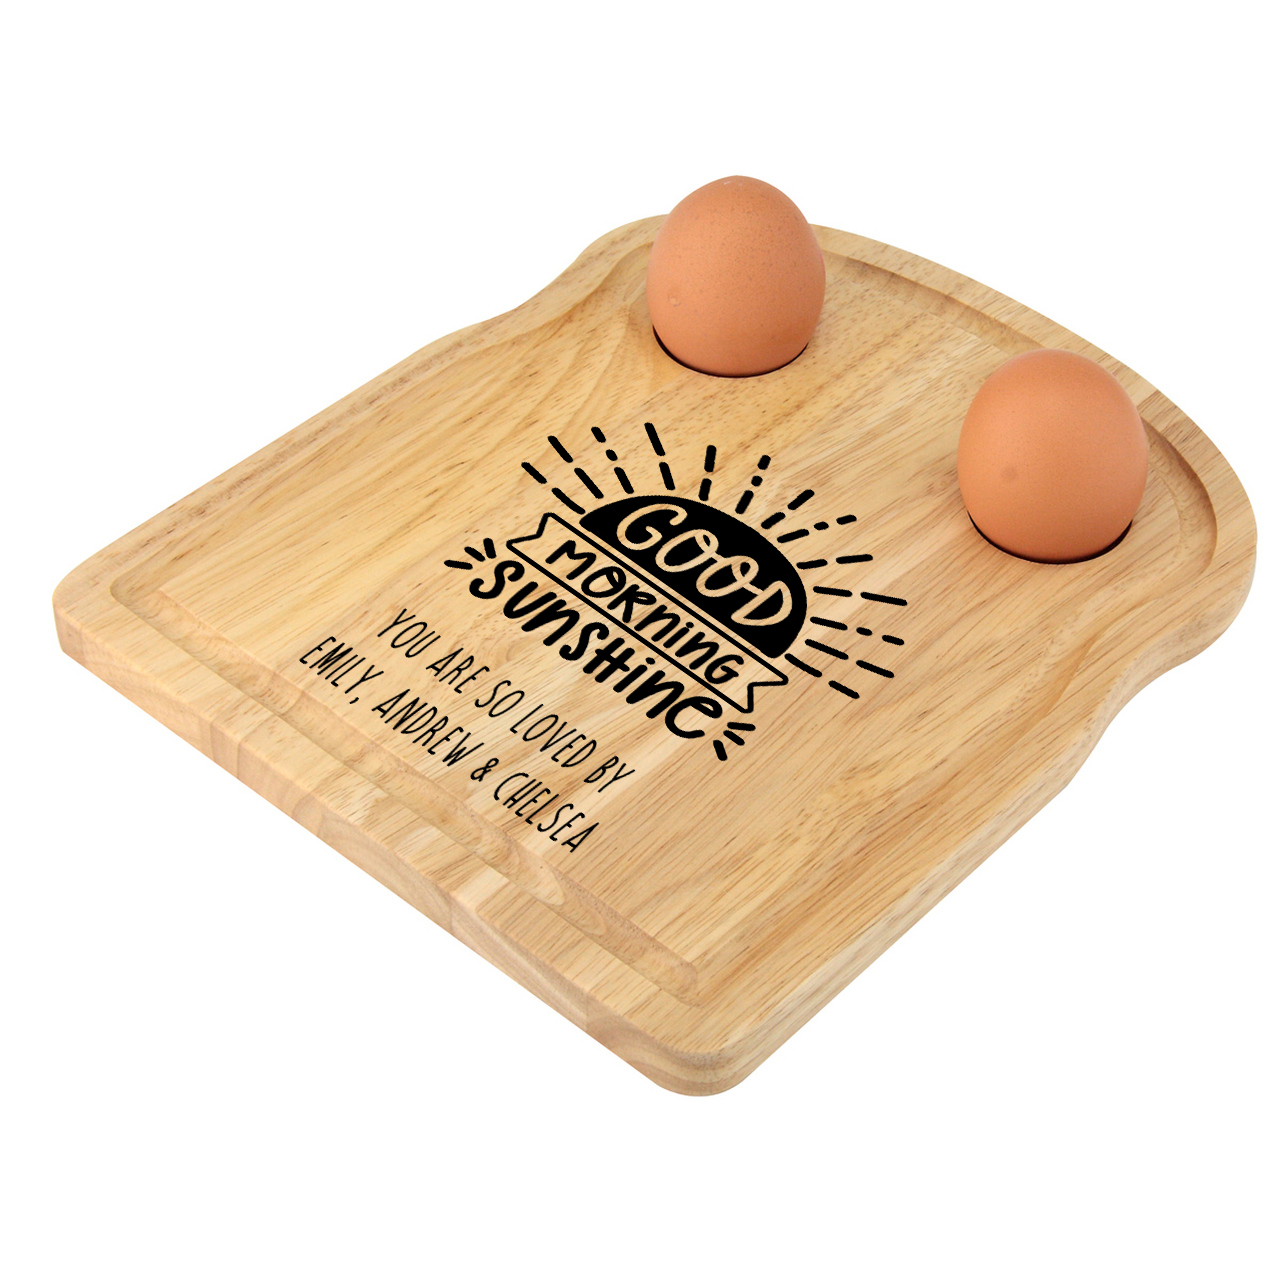 Wooden Loaf Egg Board with good morning sunshine personalised